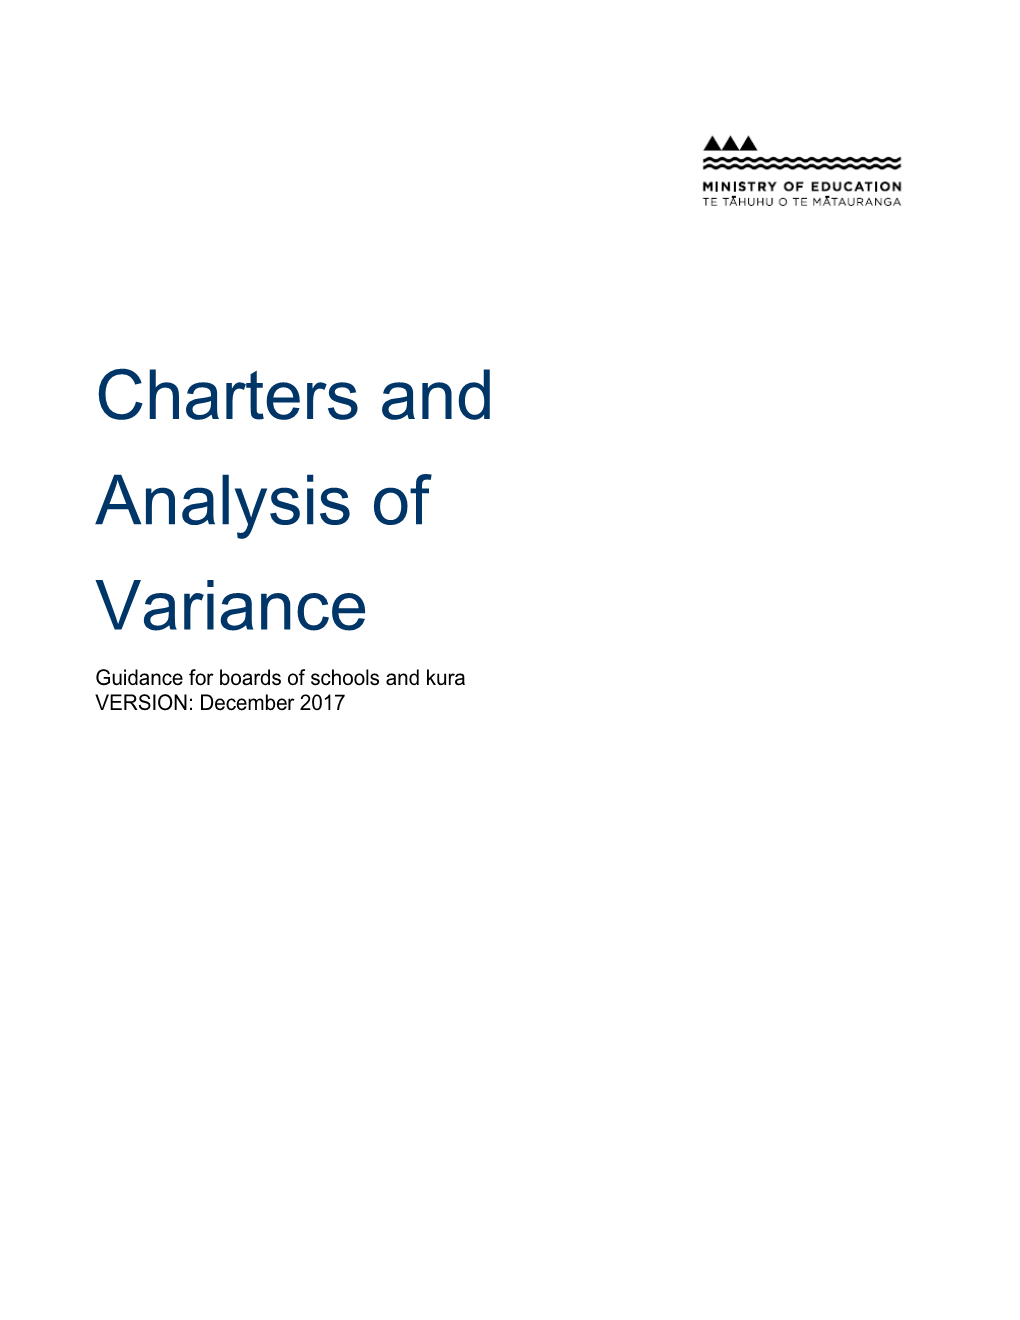 Charters and Analysis of Variance: Guidance for Secondary Schools